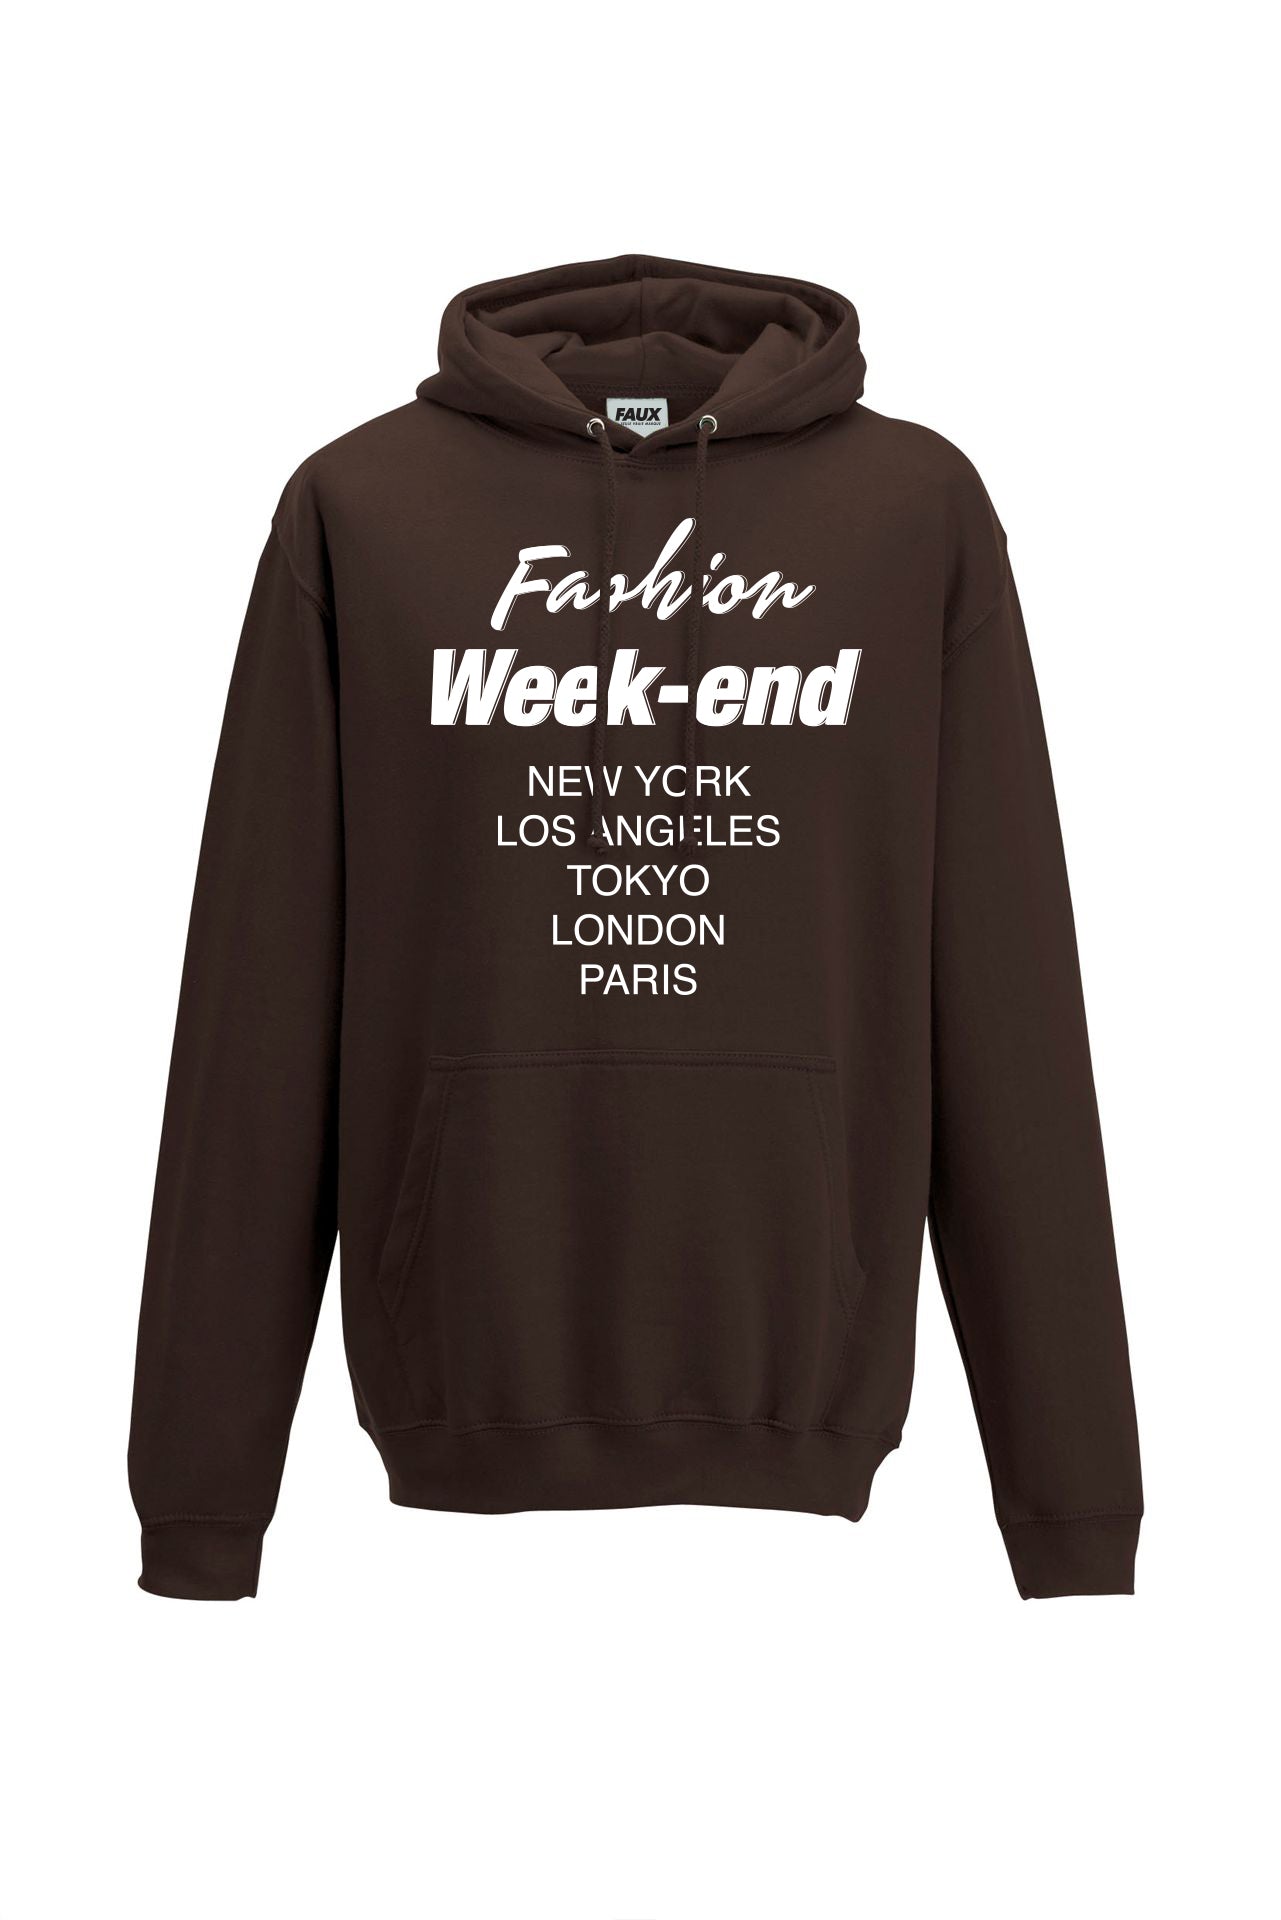 Fashion Week-end - Hoodie Deluxe-Sweat shirts-Atelier Amelot